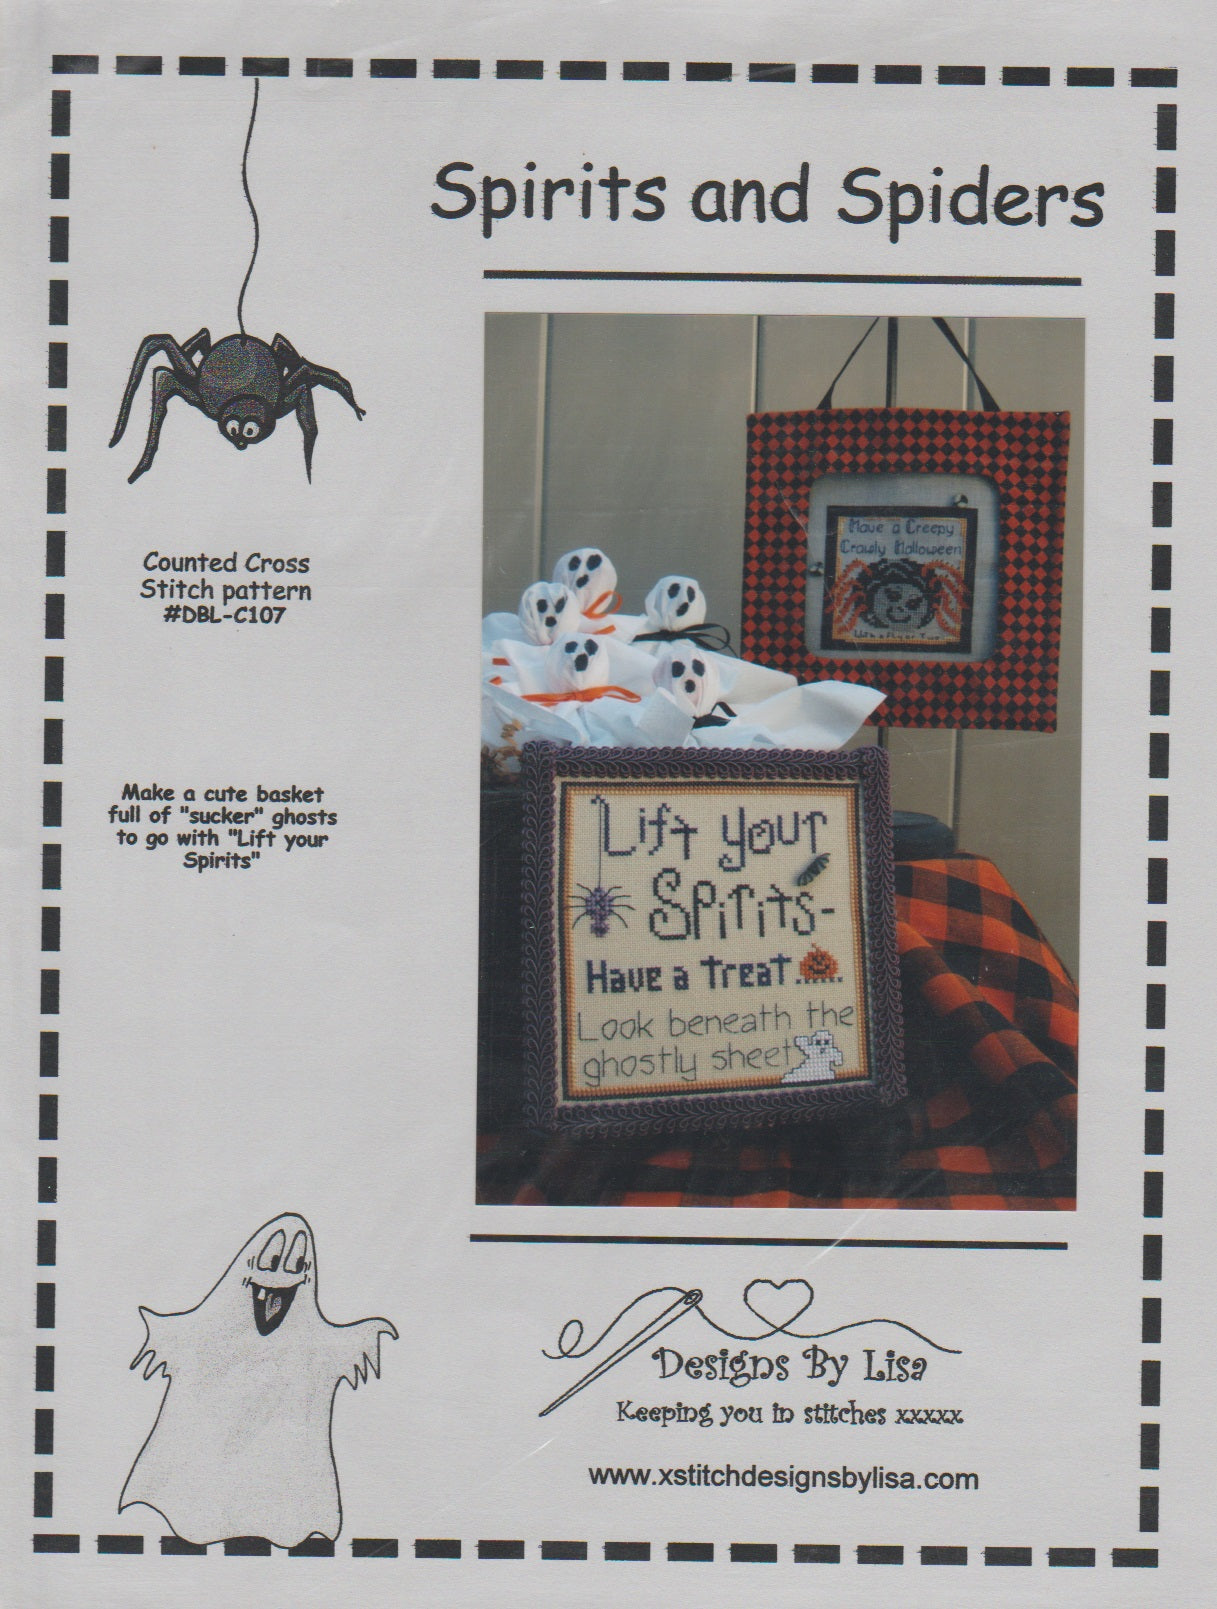 Designs By Lisa Spirits and Spiders halloween cross stitch pattern